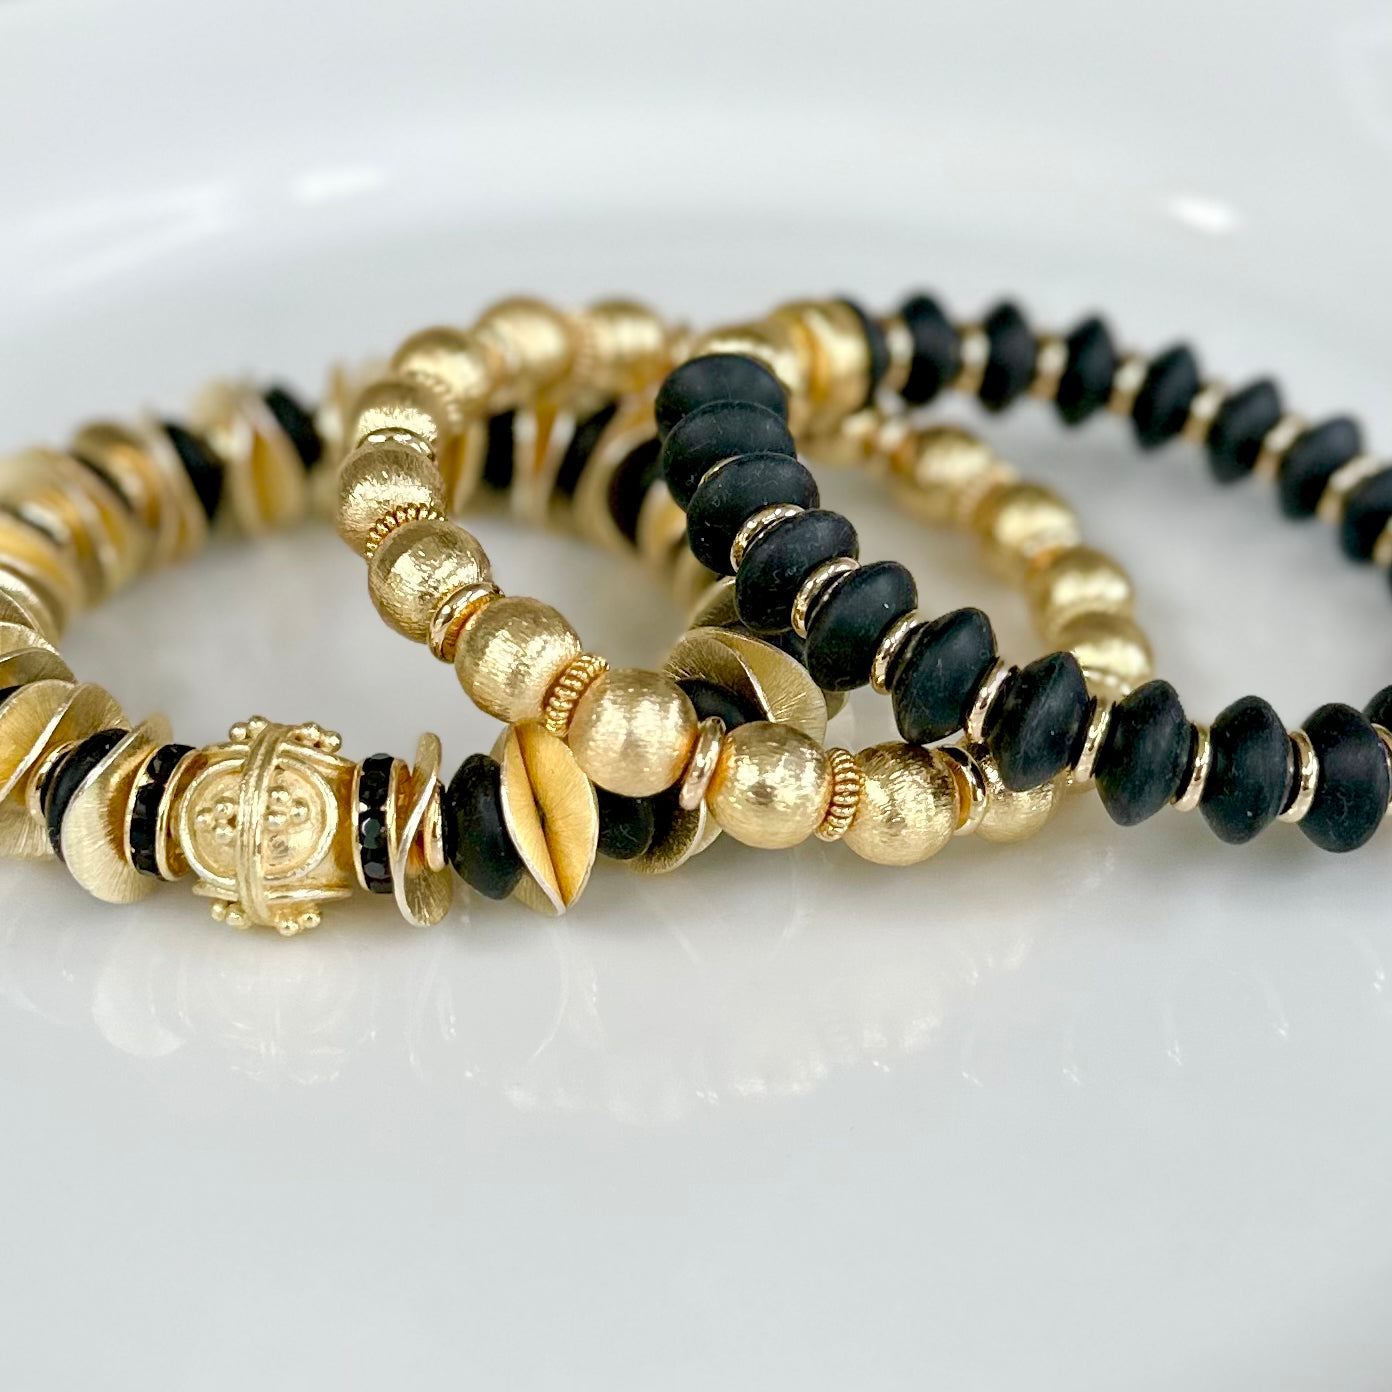 NEW! BLACK COIL BRACELET WITH GOLD ACCENTS